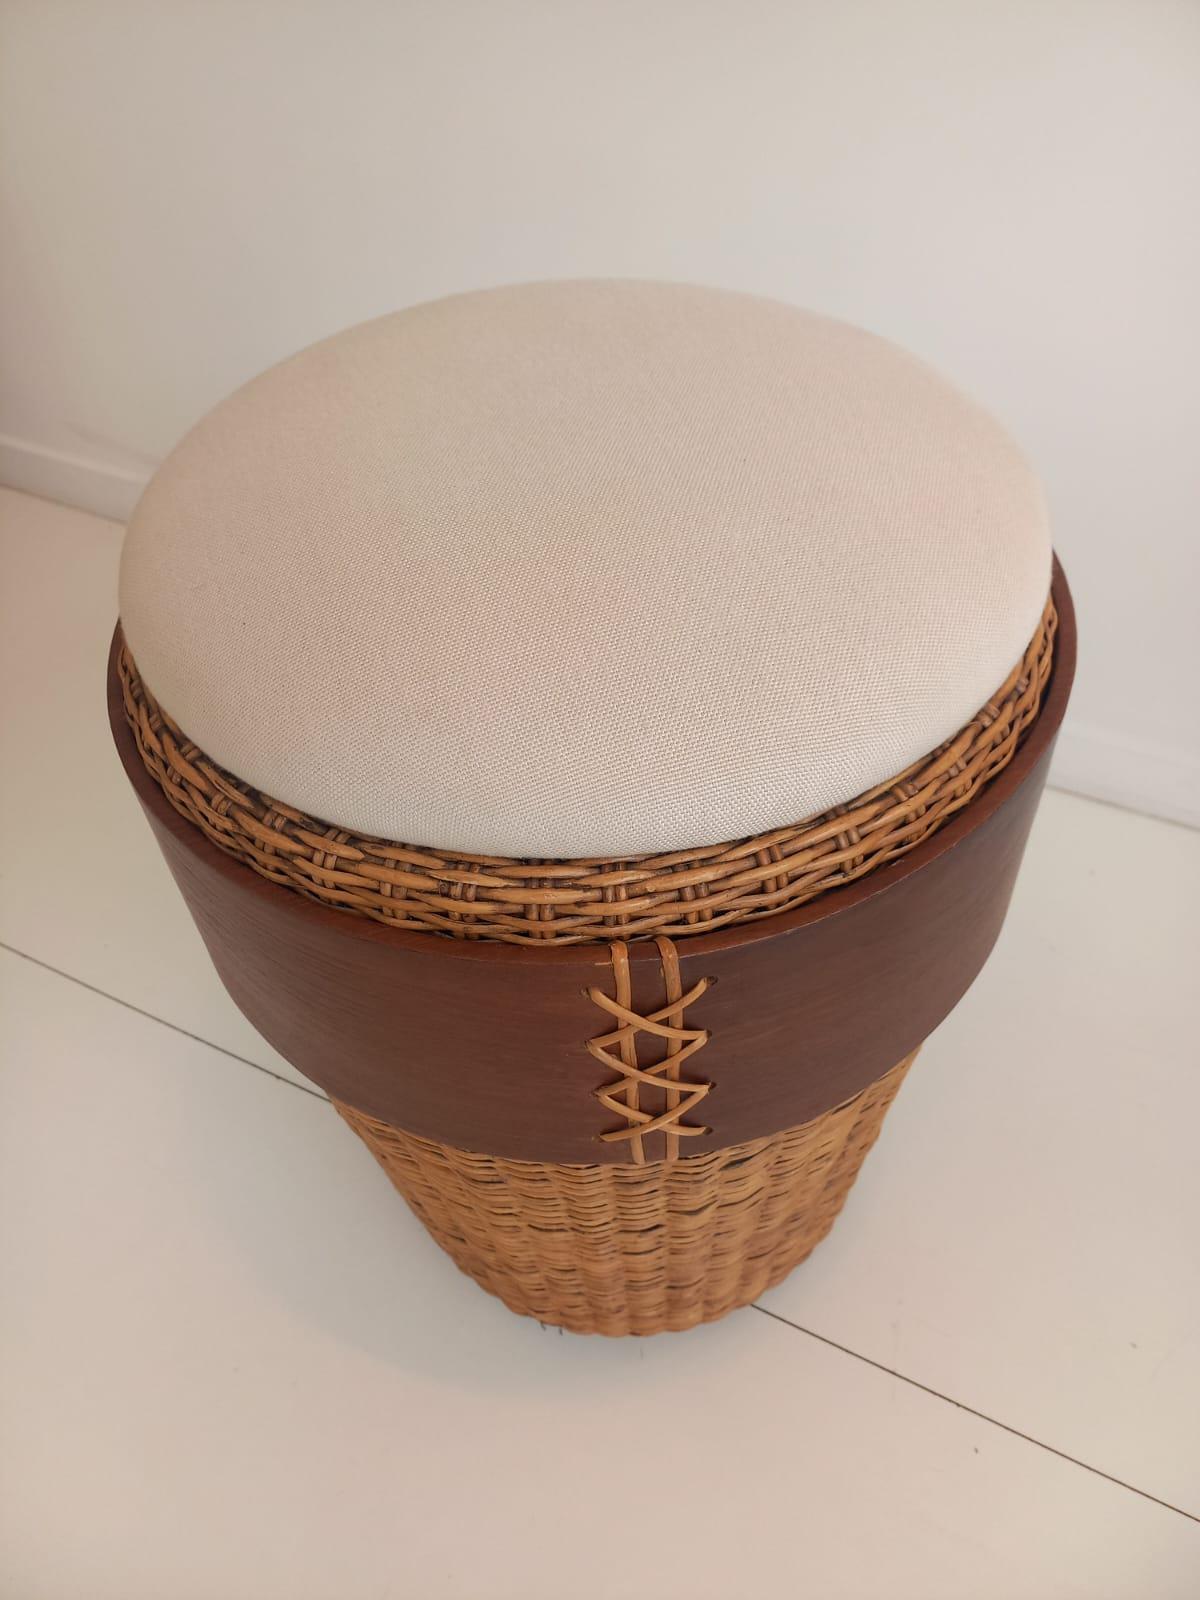 Ianomami Stool In New Condition For Sale In Campina Grande, Paraiba